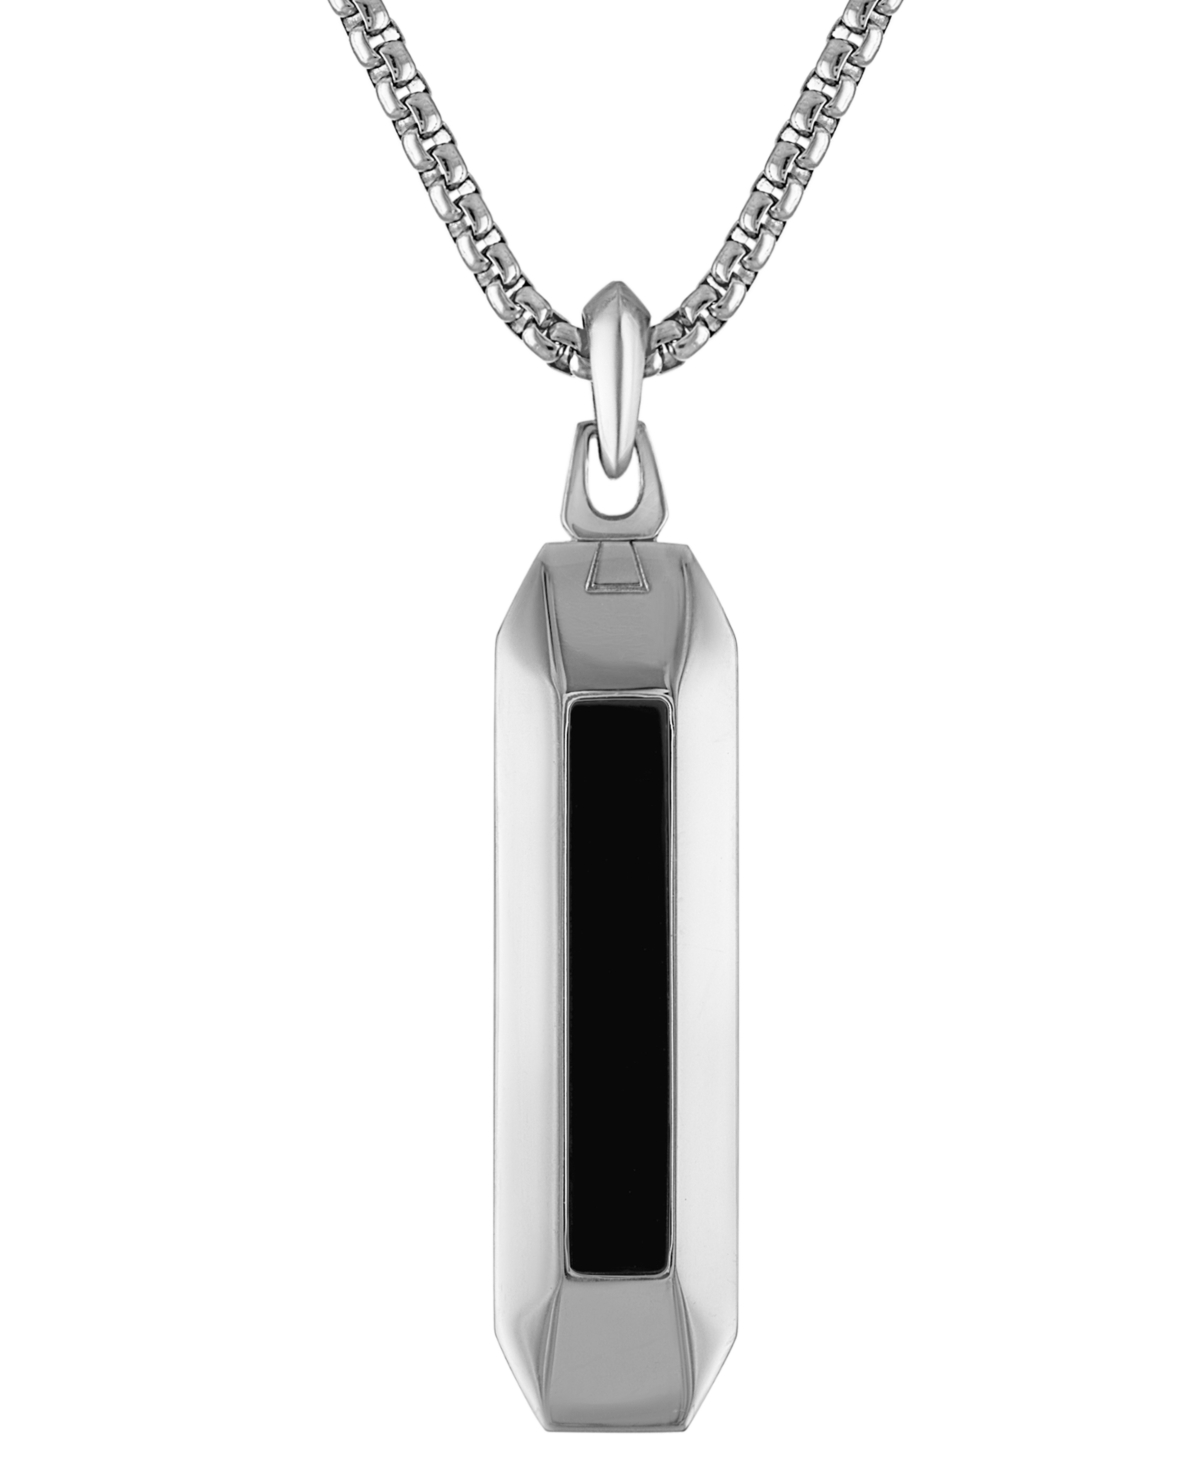 Bulova Stainless Steel Gemstone Pendant Necklace, 24" + 2" Extender In Silver Tone